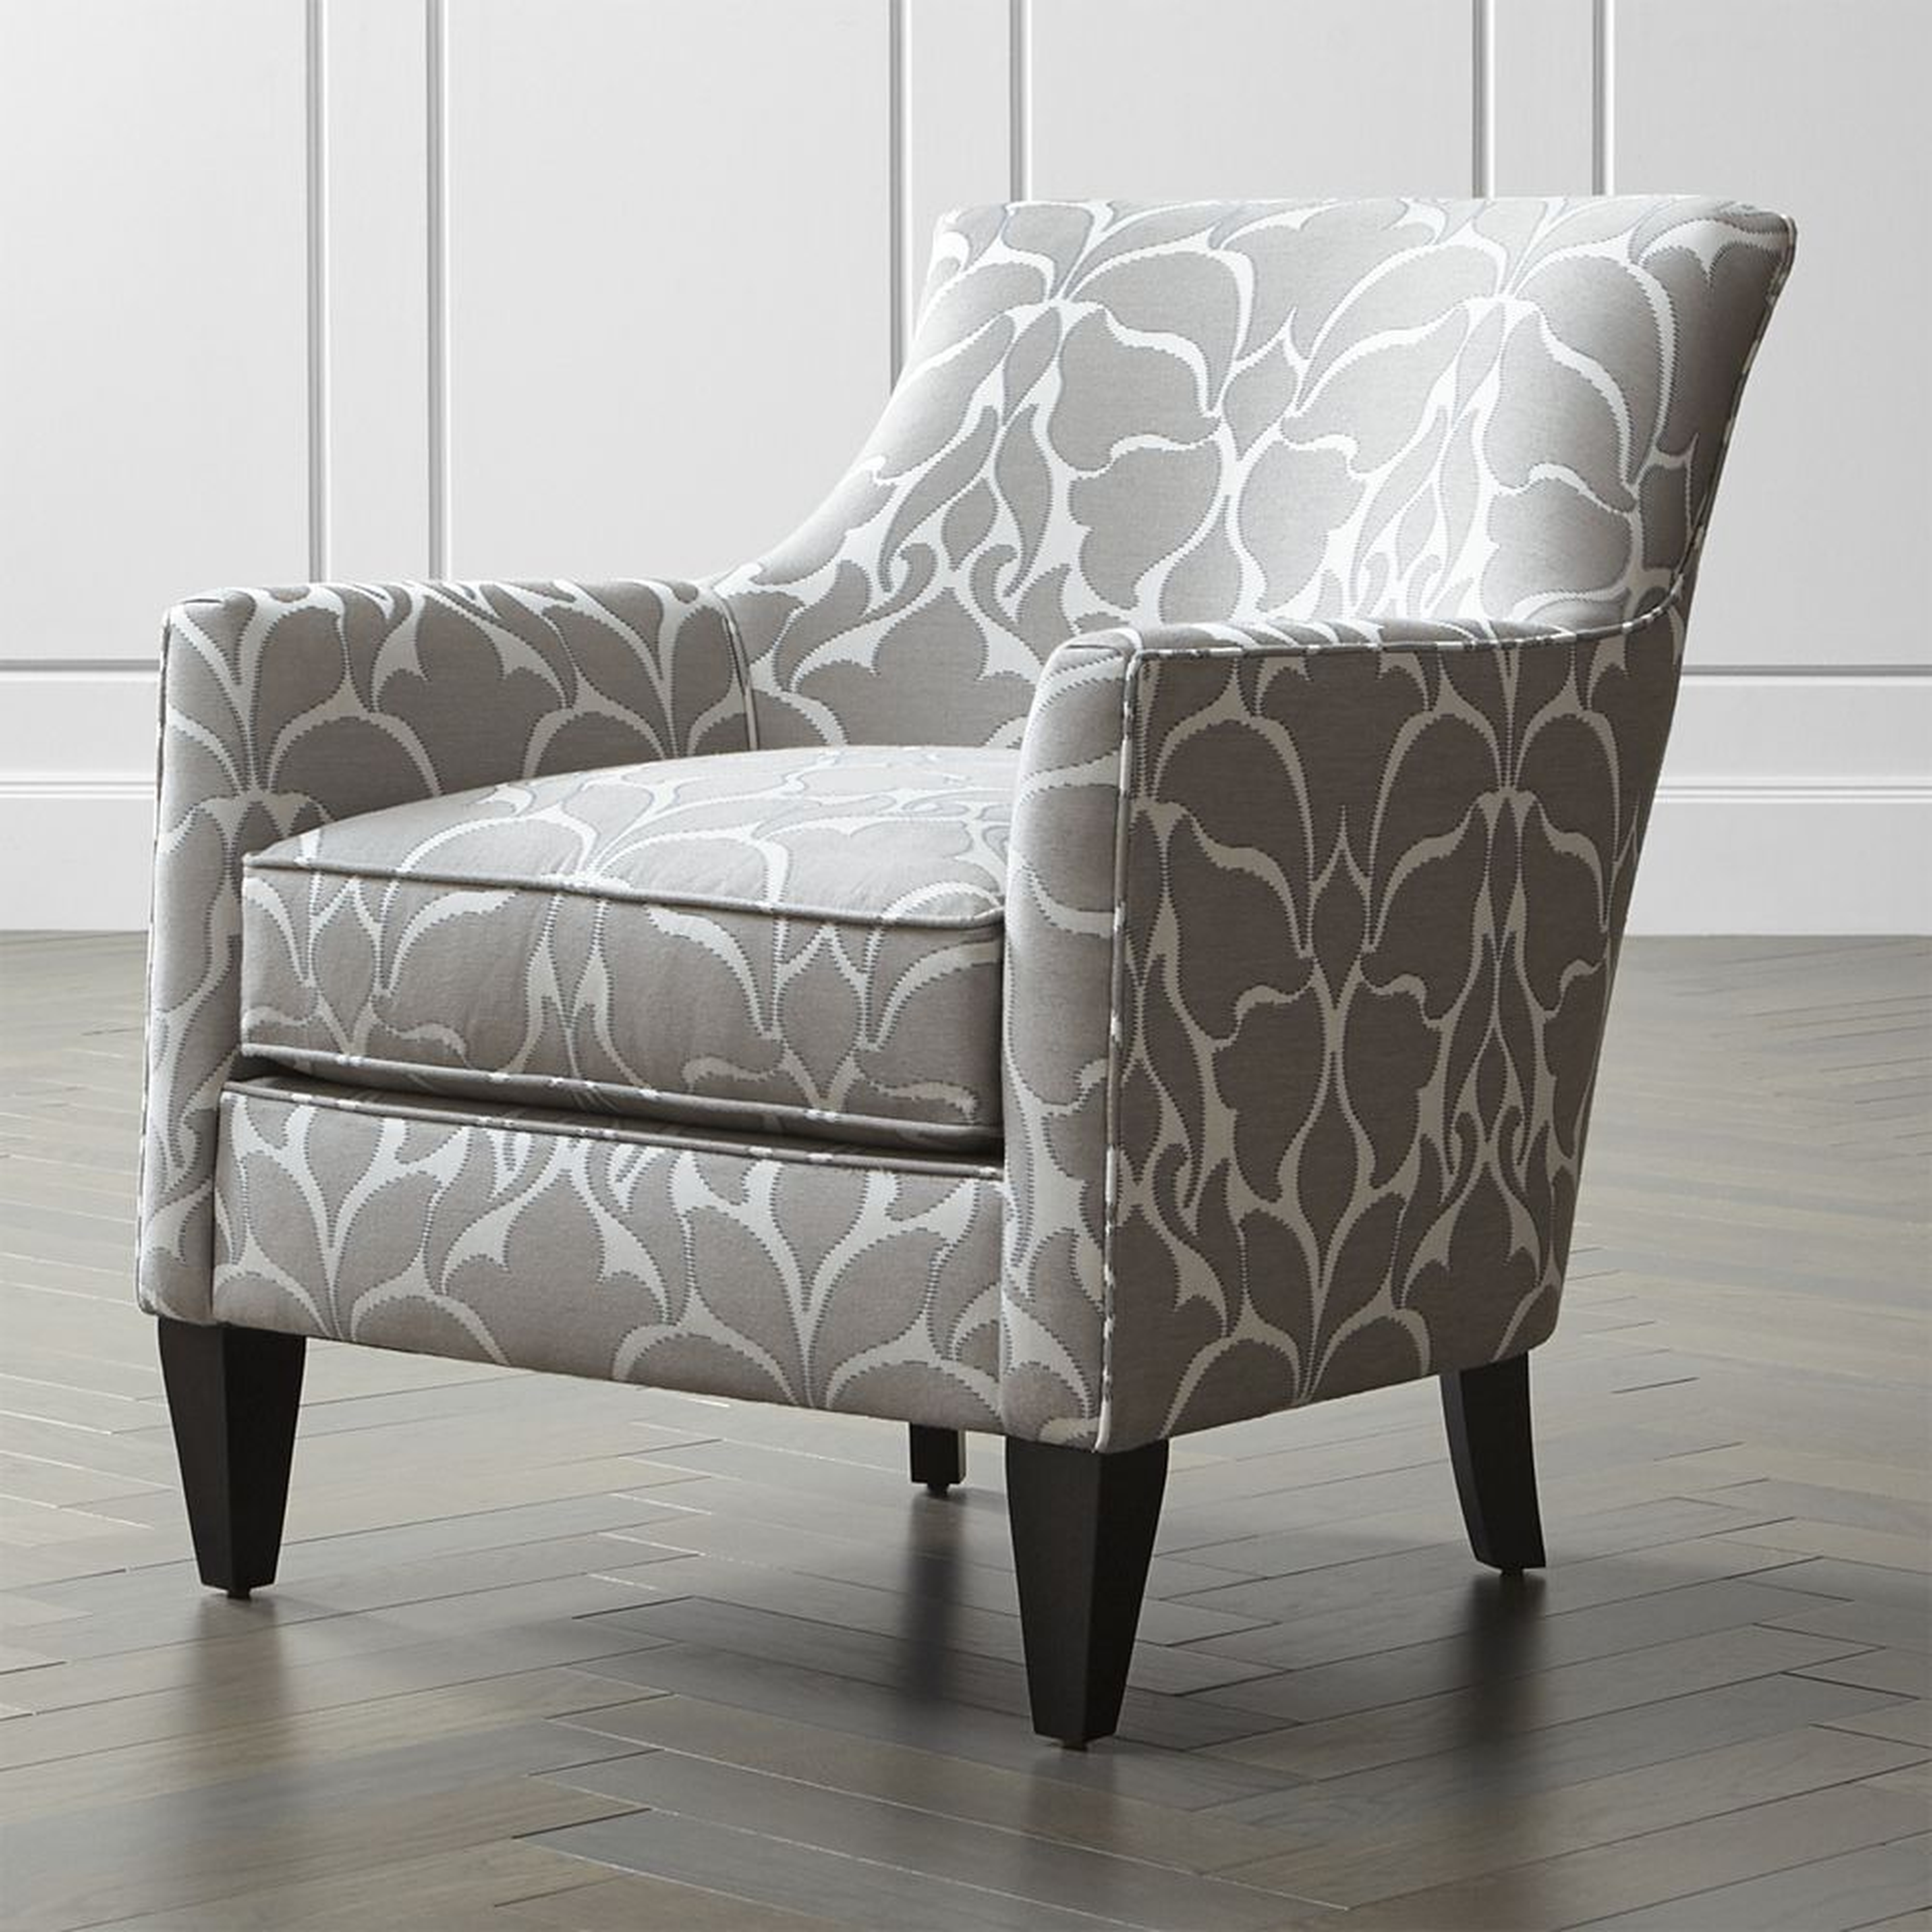 Clara Chair - Crate and Barrel